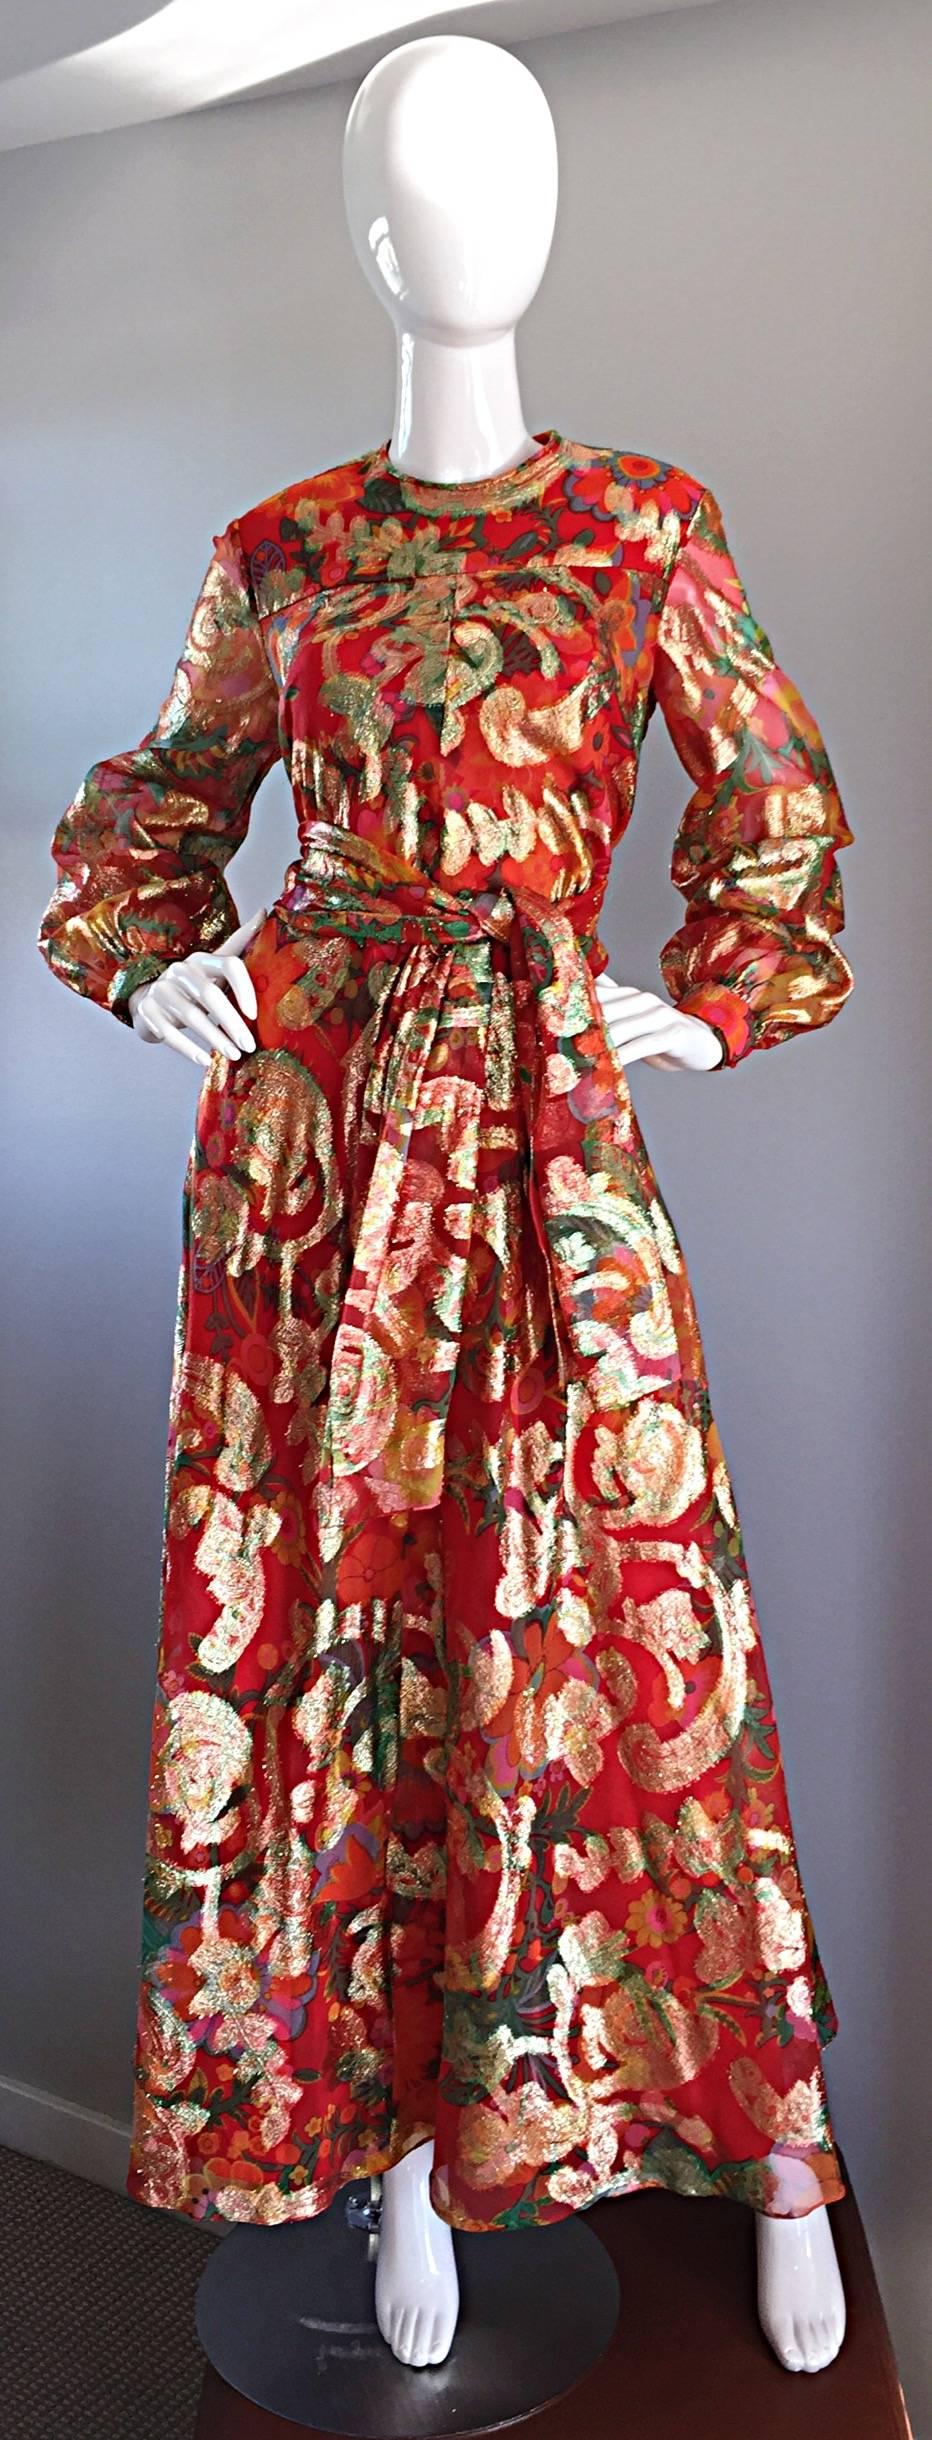 Important, and very rare 60s Oscar de la Renta silk A-line dress / gown, with matching head scarf, or sash belt! Such a flattering empire fit, that screams chic! 
This fabulous late 1960s early 1970s Oscar de la Renta dress is a superb example of